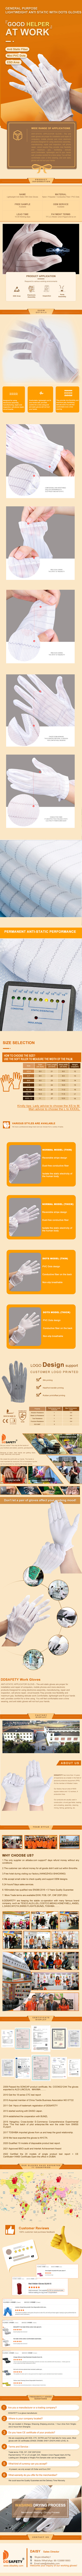 Anti Static Cotton Work Gloves with Mini Dots on Palm - DCH119 Anti Static Cotton Work Gloves with Mini Dots on Palm - DCH119 gloves,cotton gloves,anti static gloves